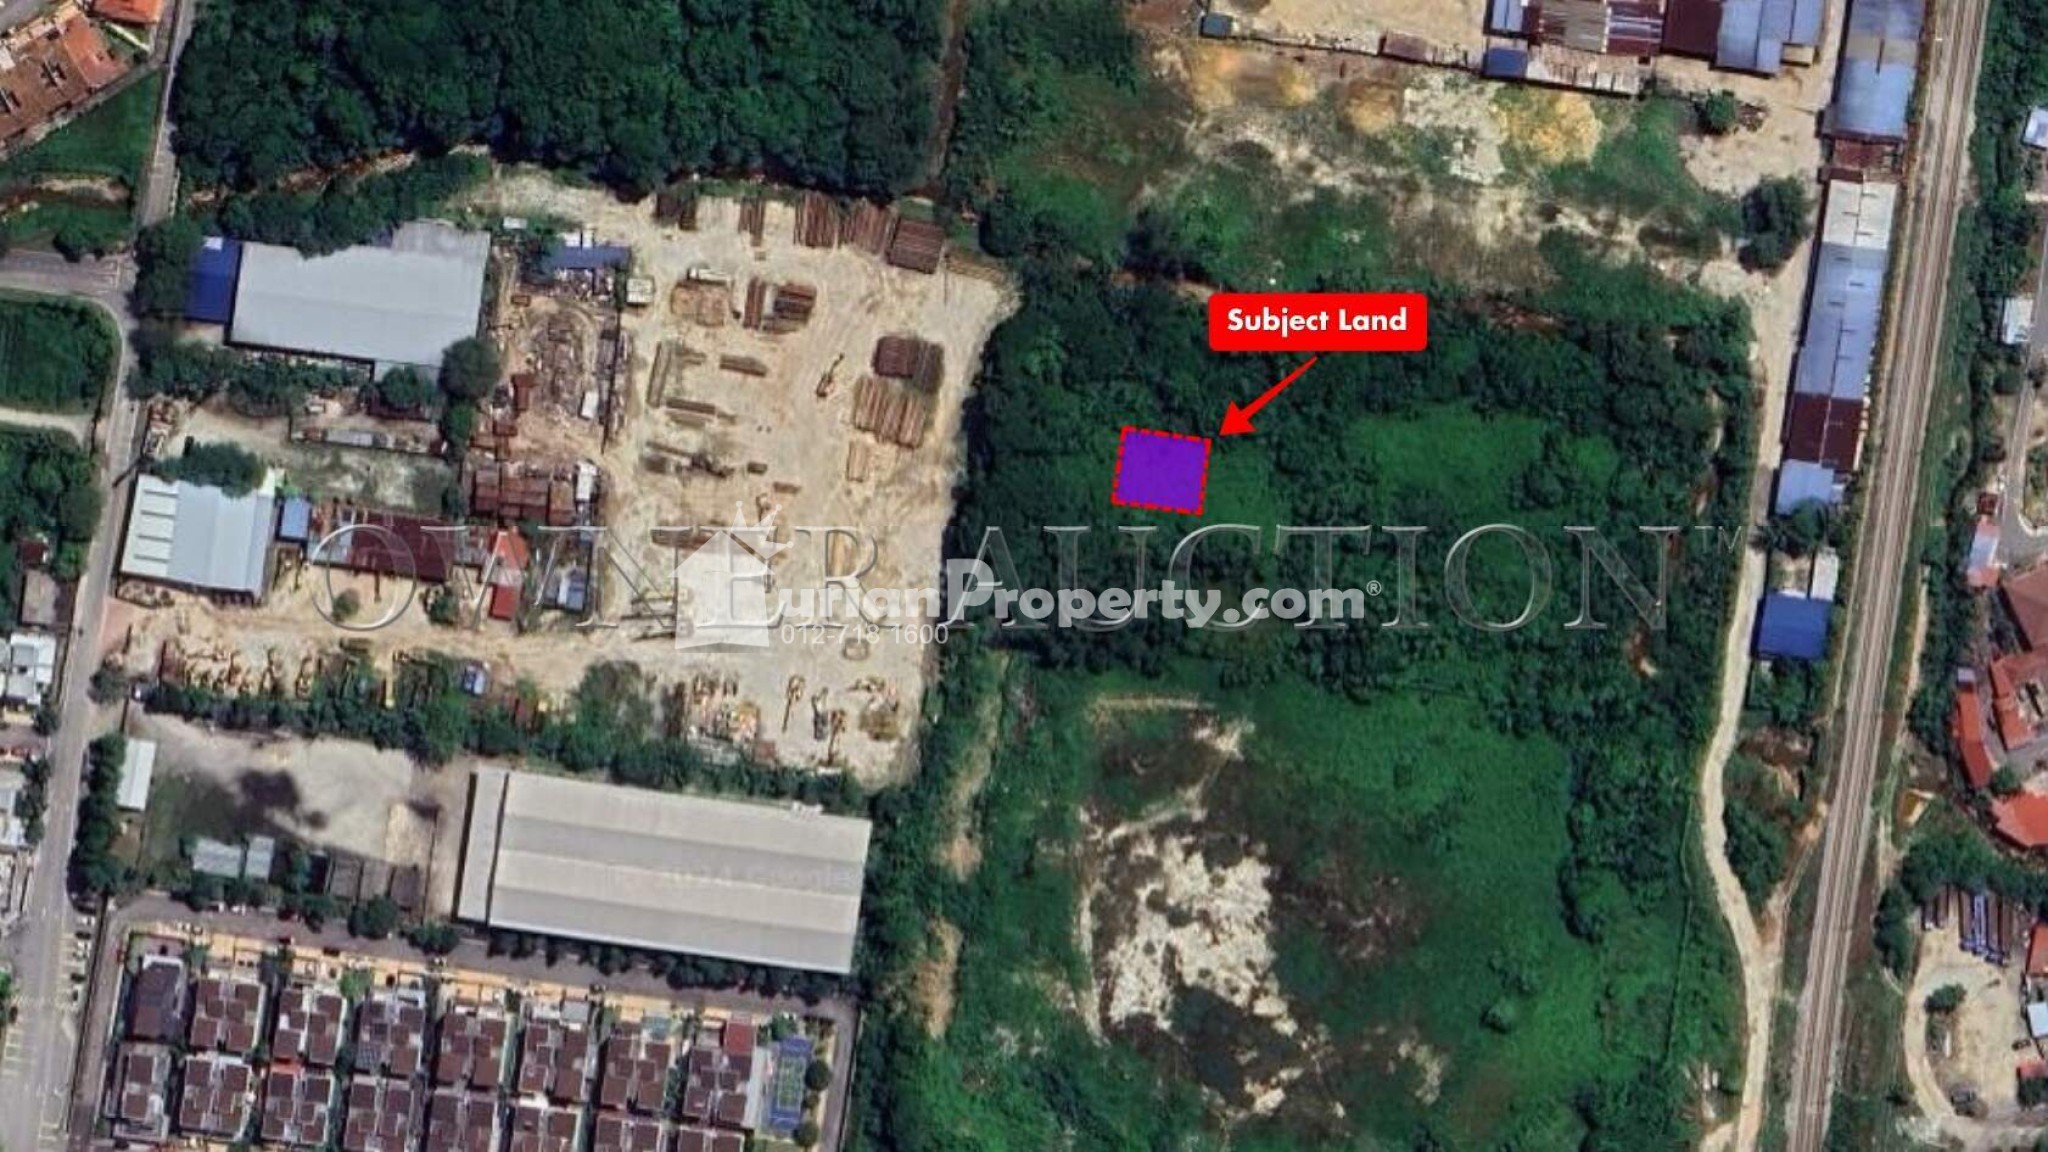 Residential Land For Auction at Sungai Buloh